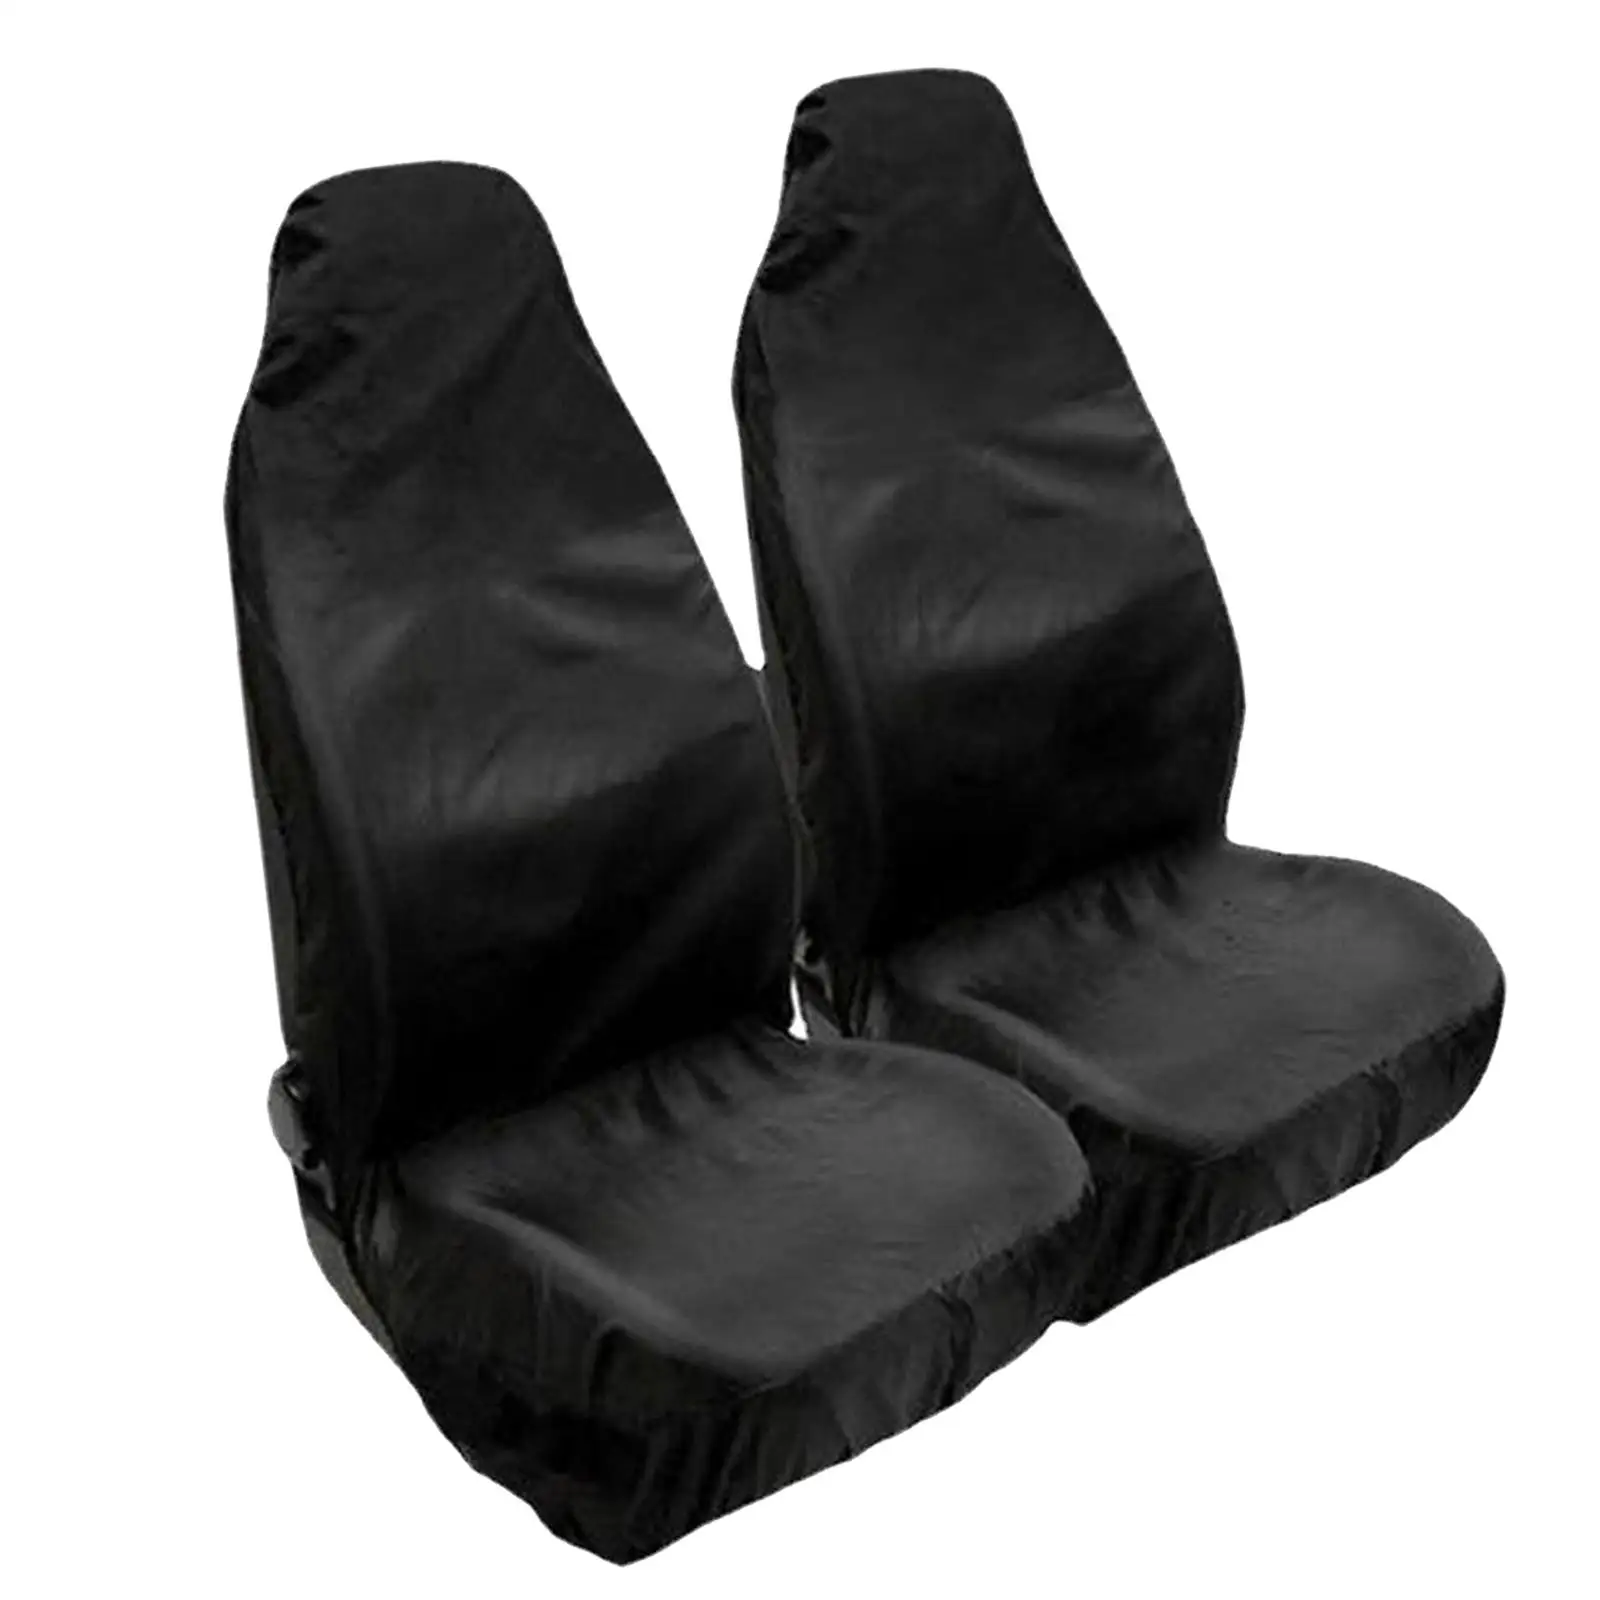 2Pcs Automotive Seat Covers Seat Protection Cover for Sedan Trucks